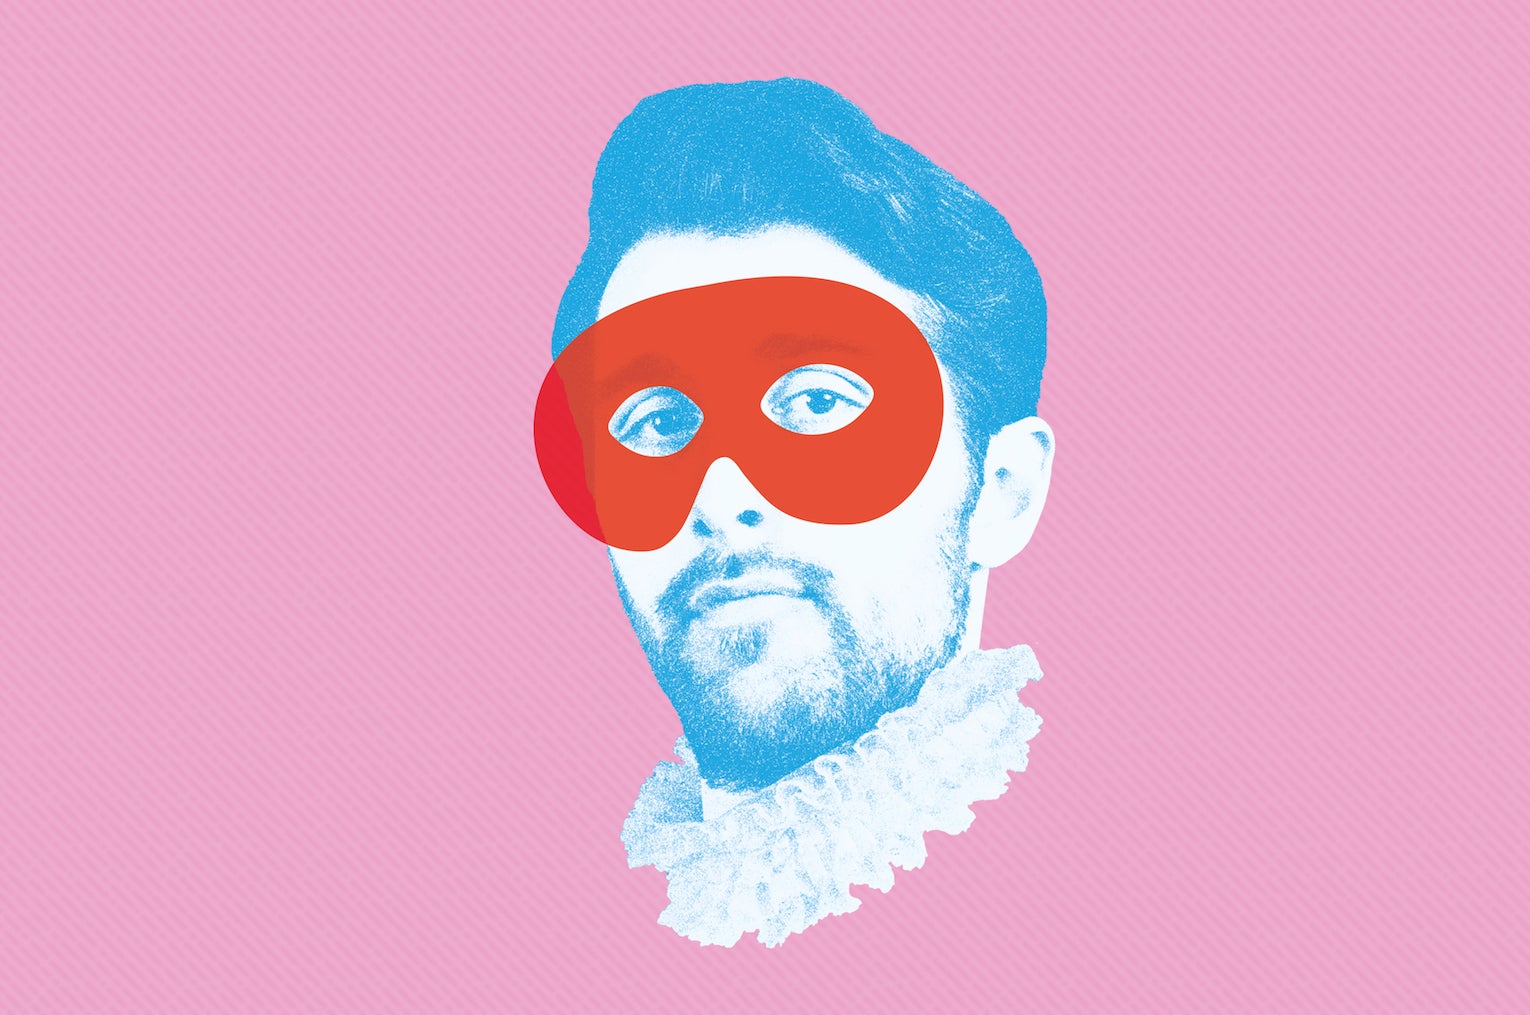 Tartuffe - an Abbey Theatre Production, man's head in blue and white, wearing a white ruffle with a red eye mask, against a pink background